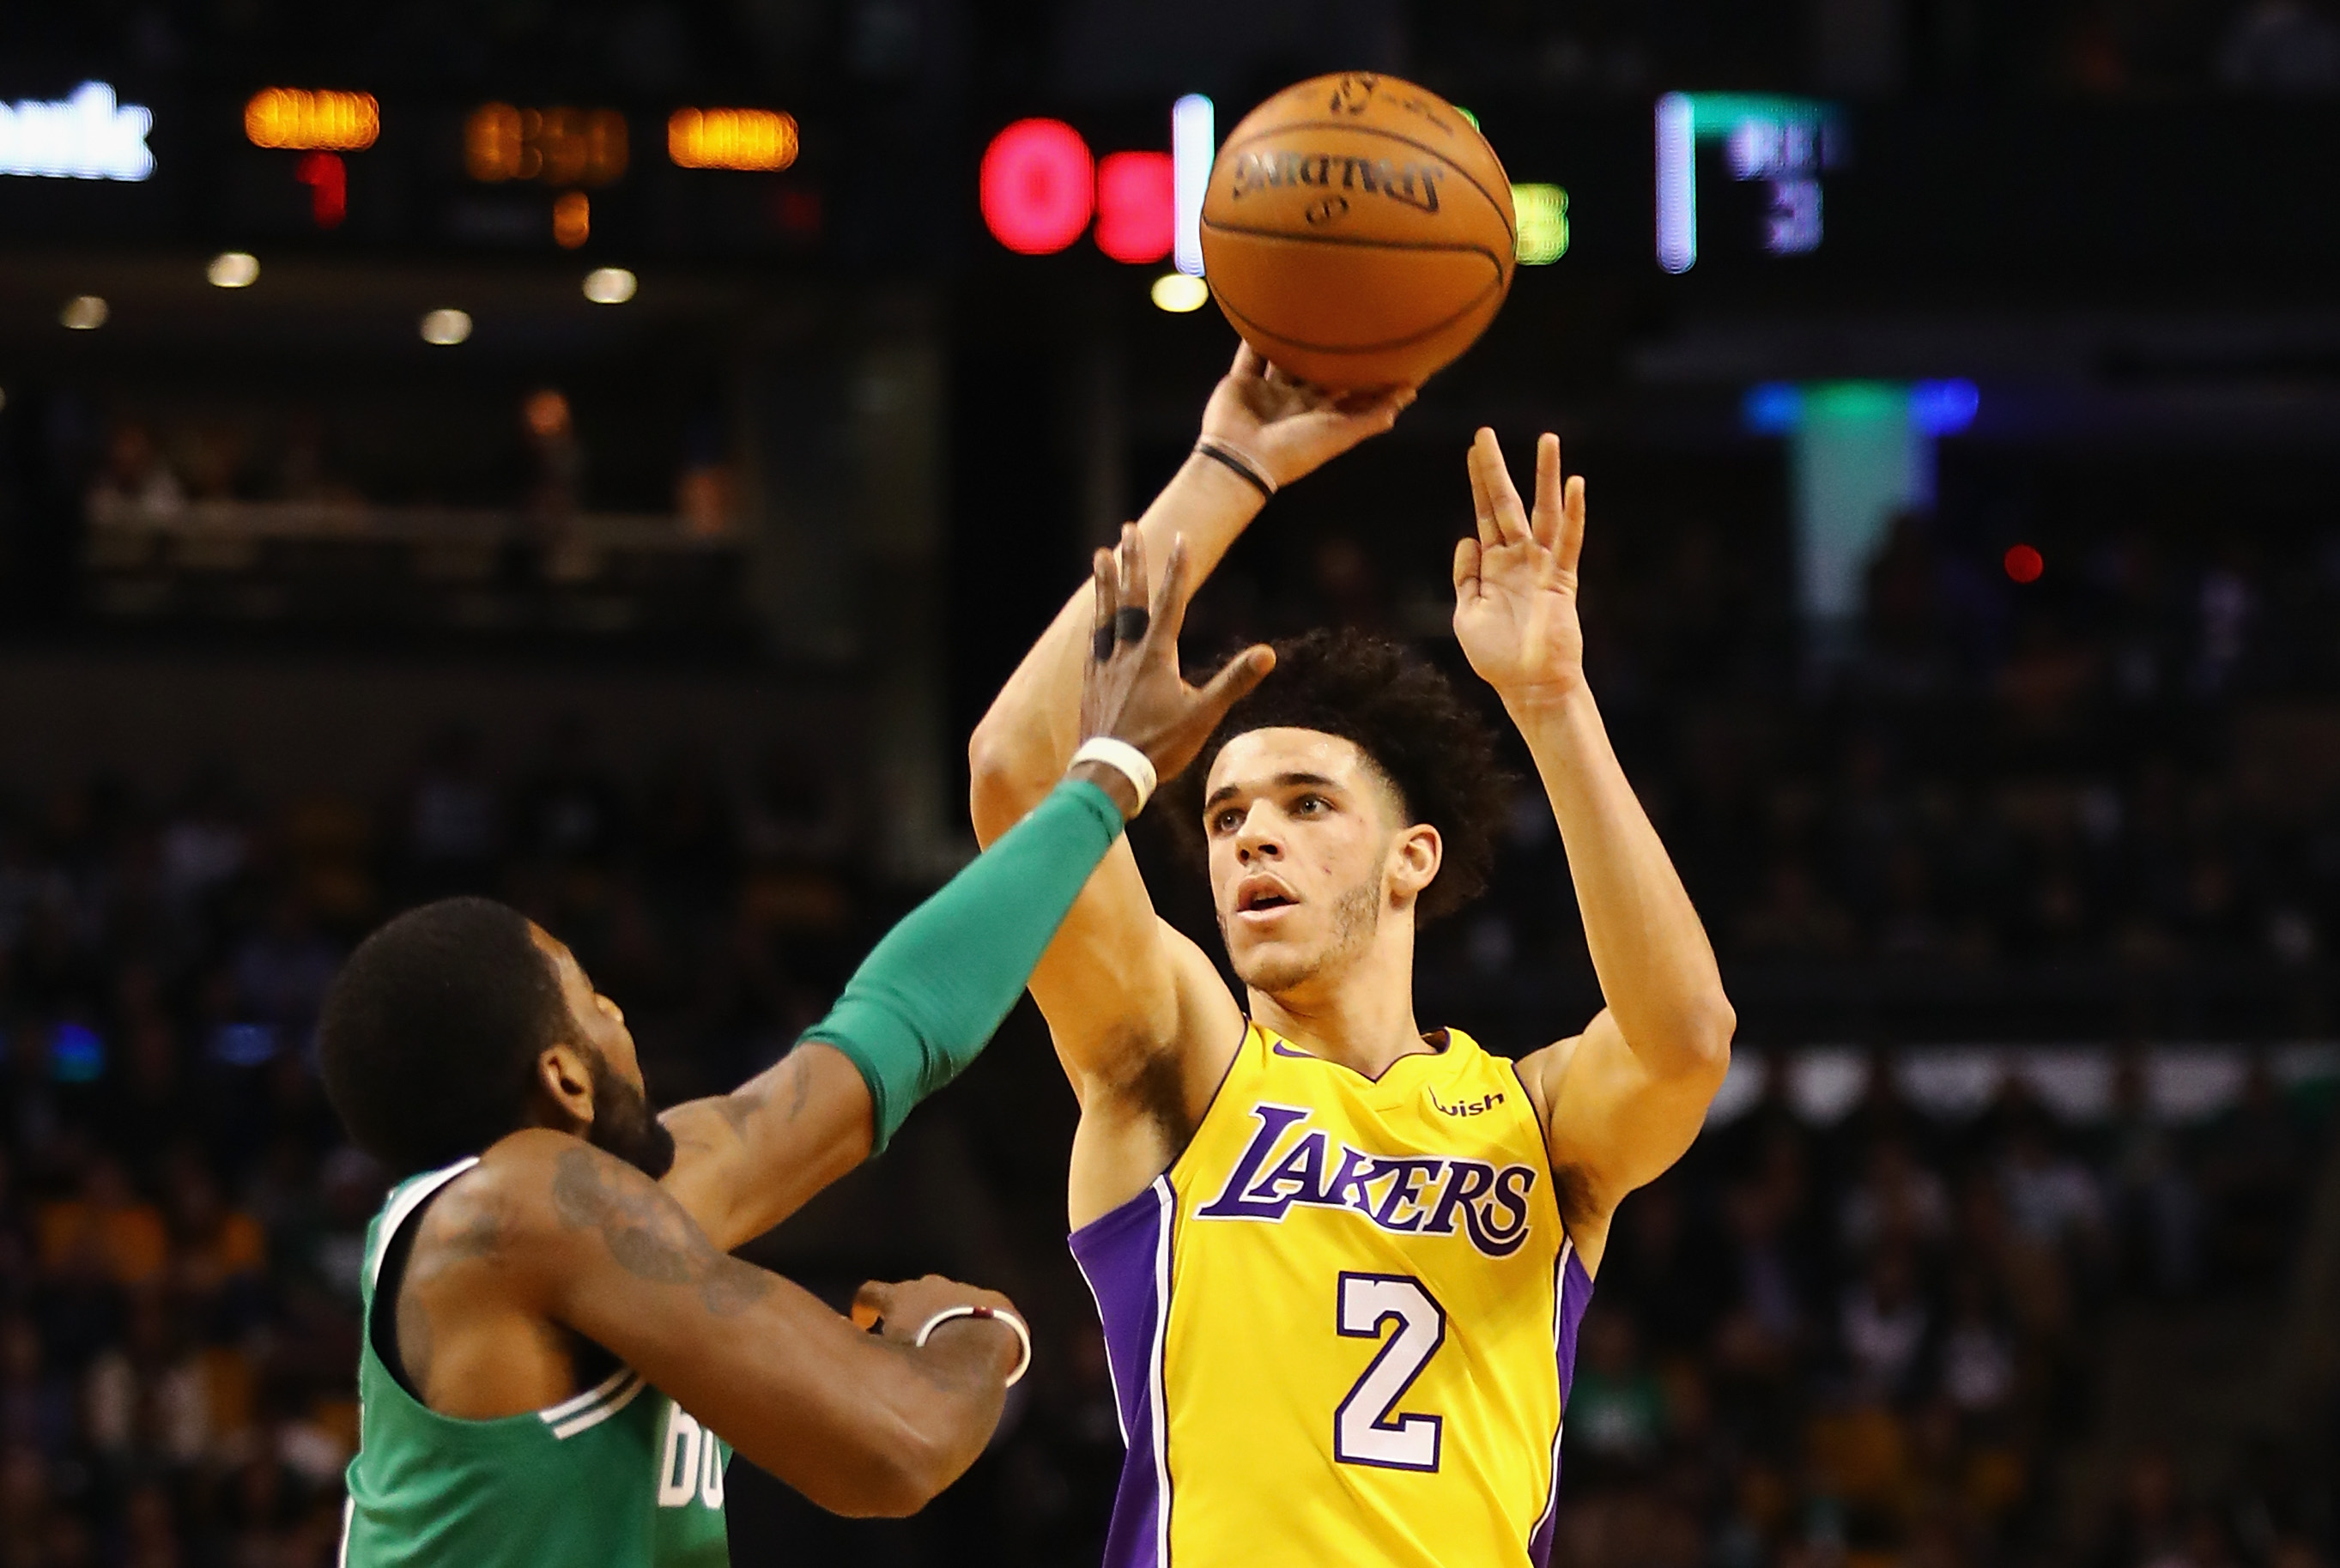 Los Angeles Lakers: Lonzo Ball's goal is Rookie of the Year